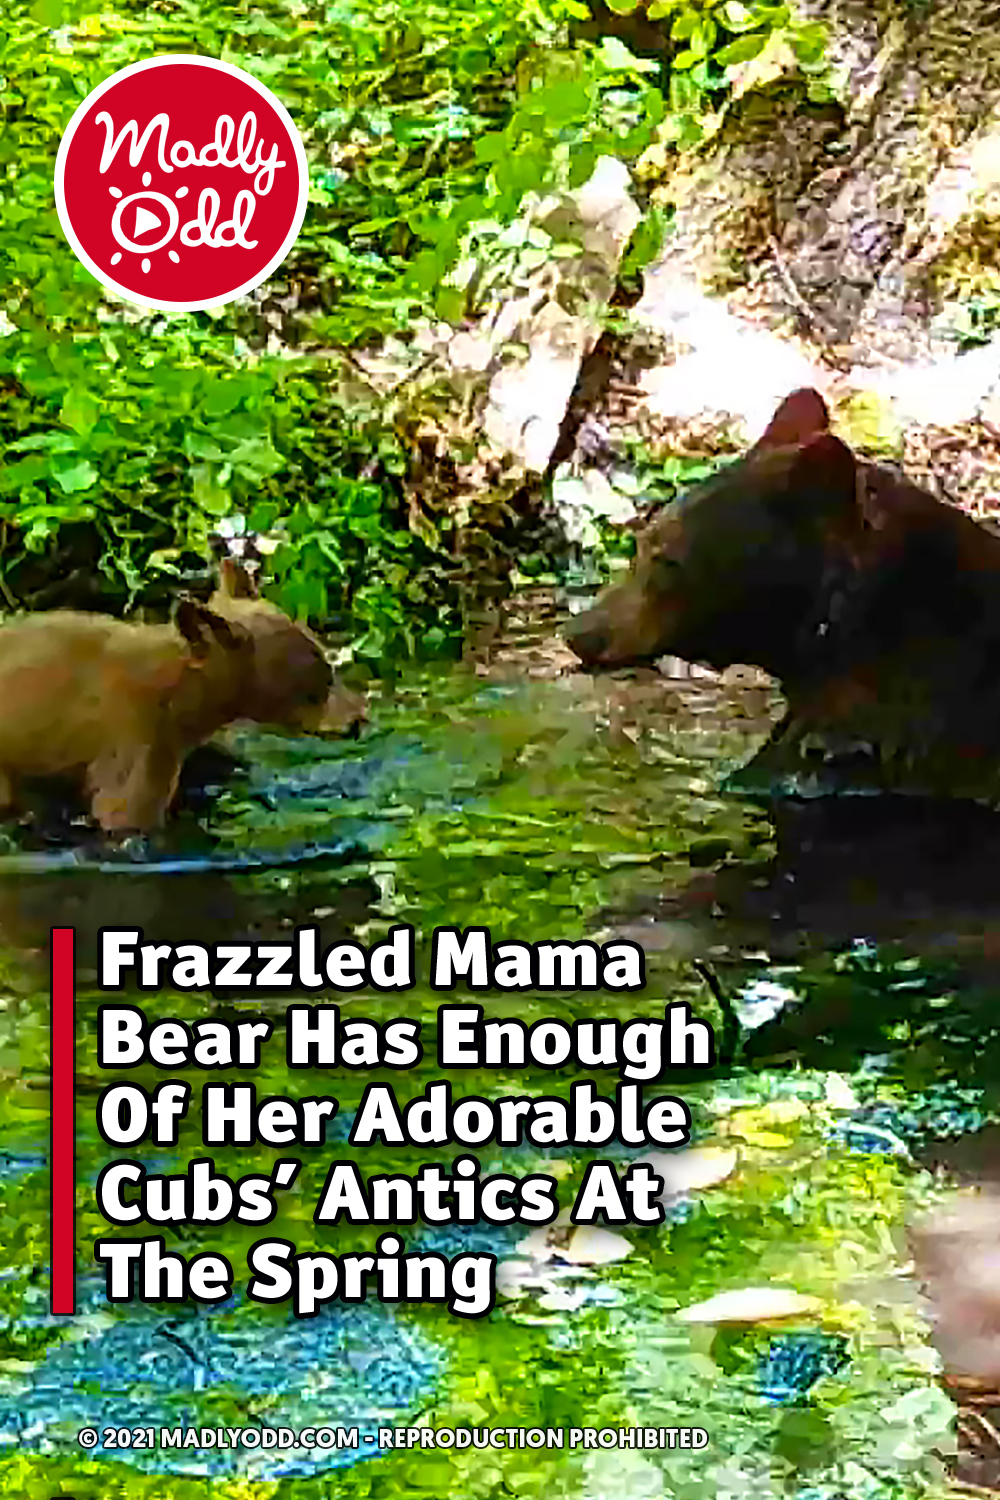 Frazzled Mama Bear Has Enough Of Her Adorable Cubs’ Antics At The Spring